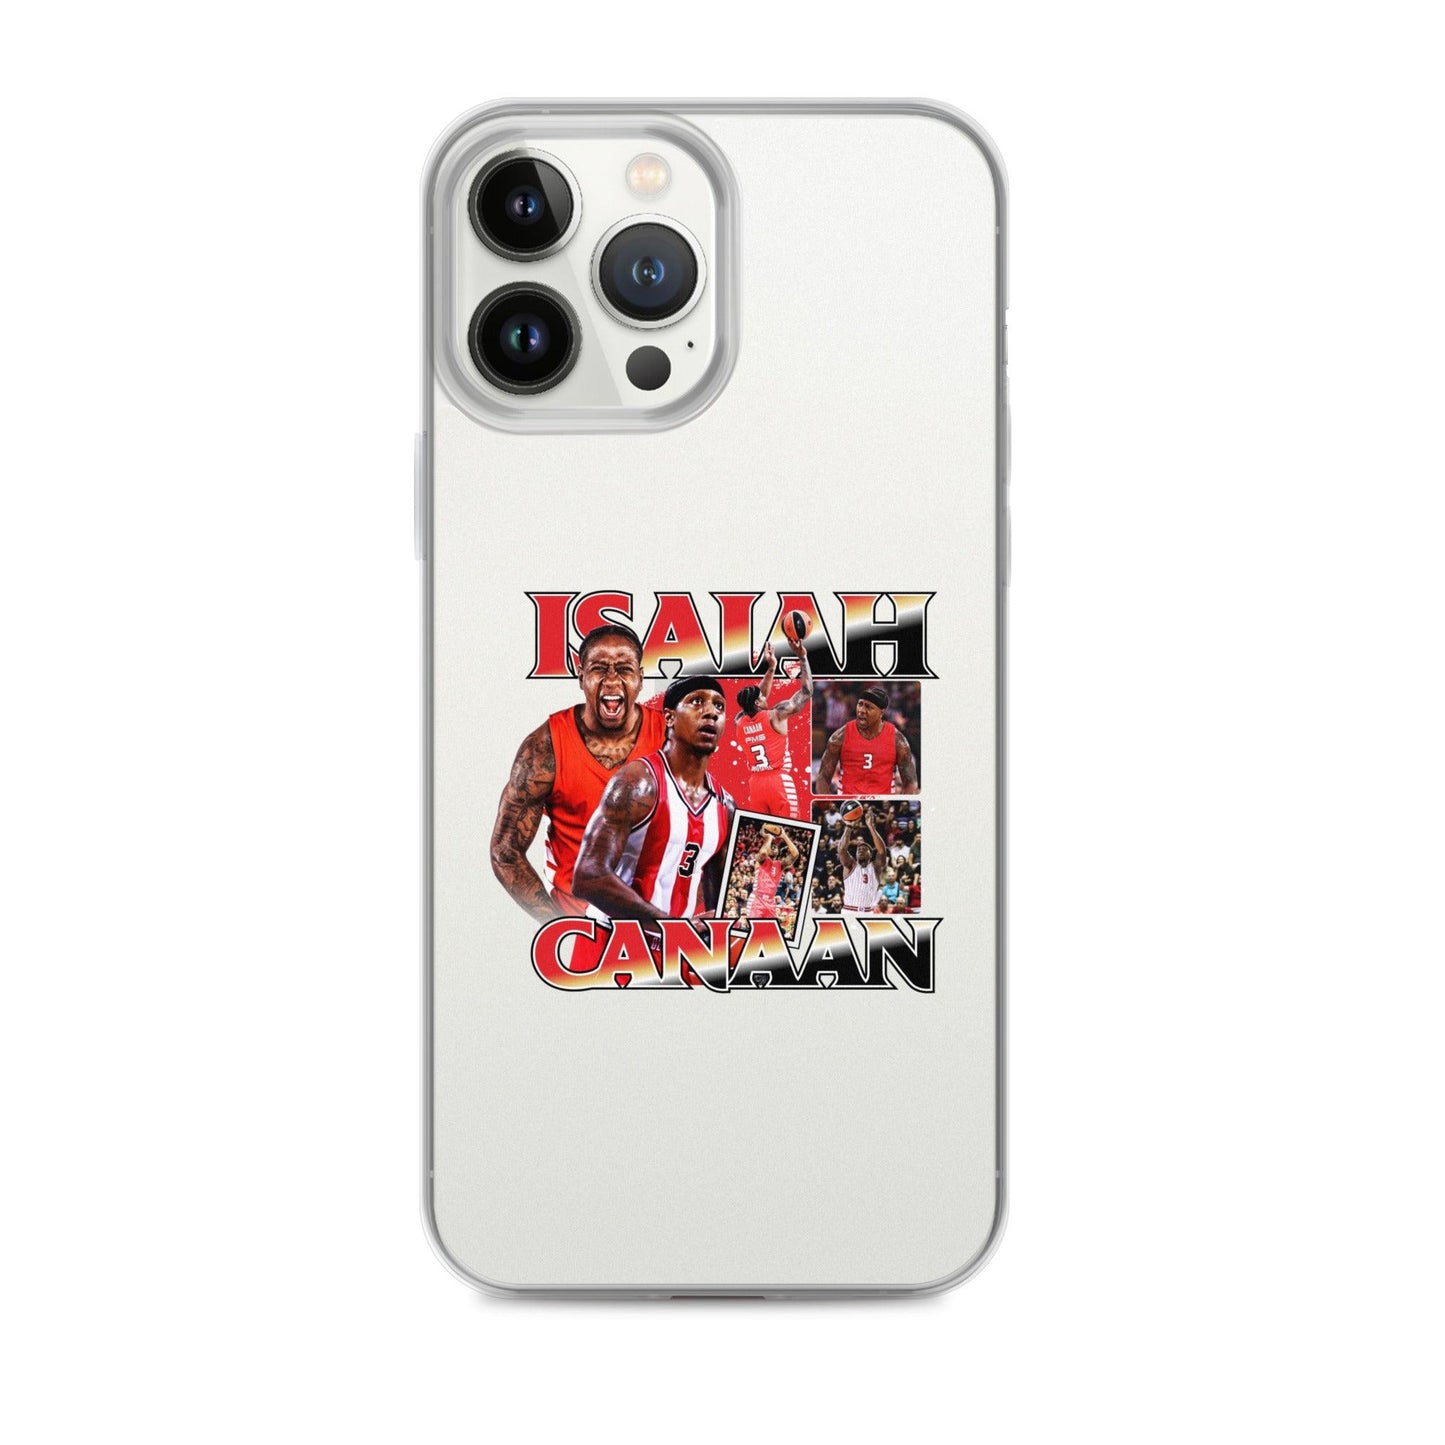 Isaiah Canaan "Vintage" iPhone® - Fan Arch